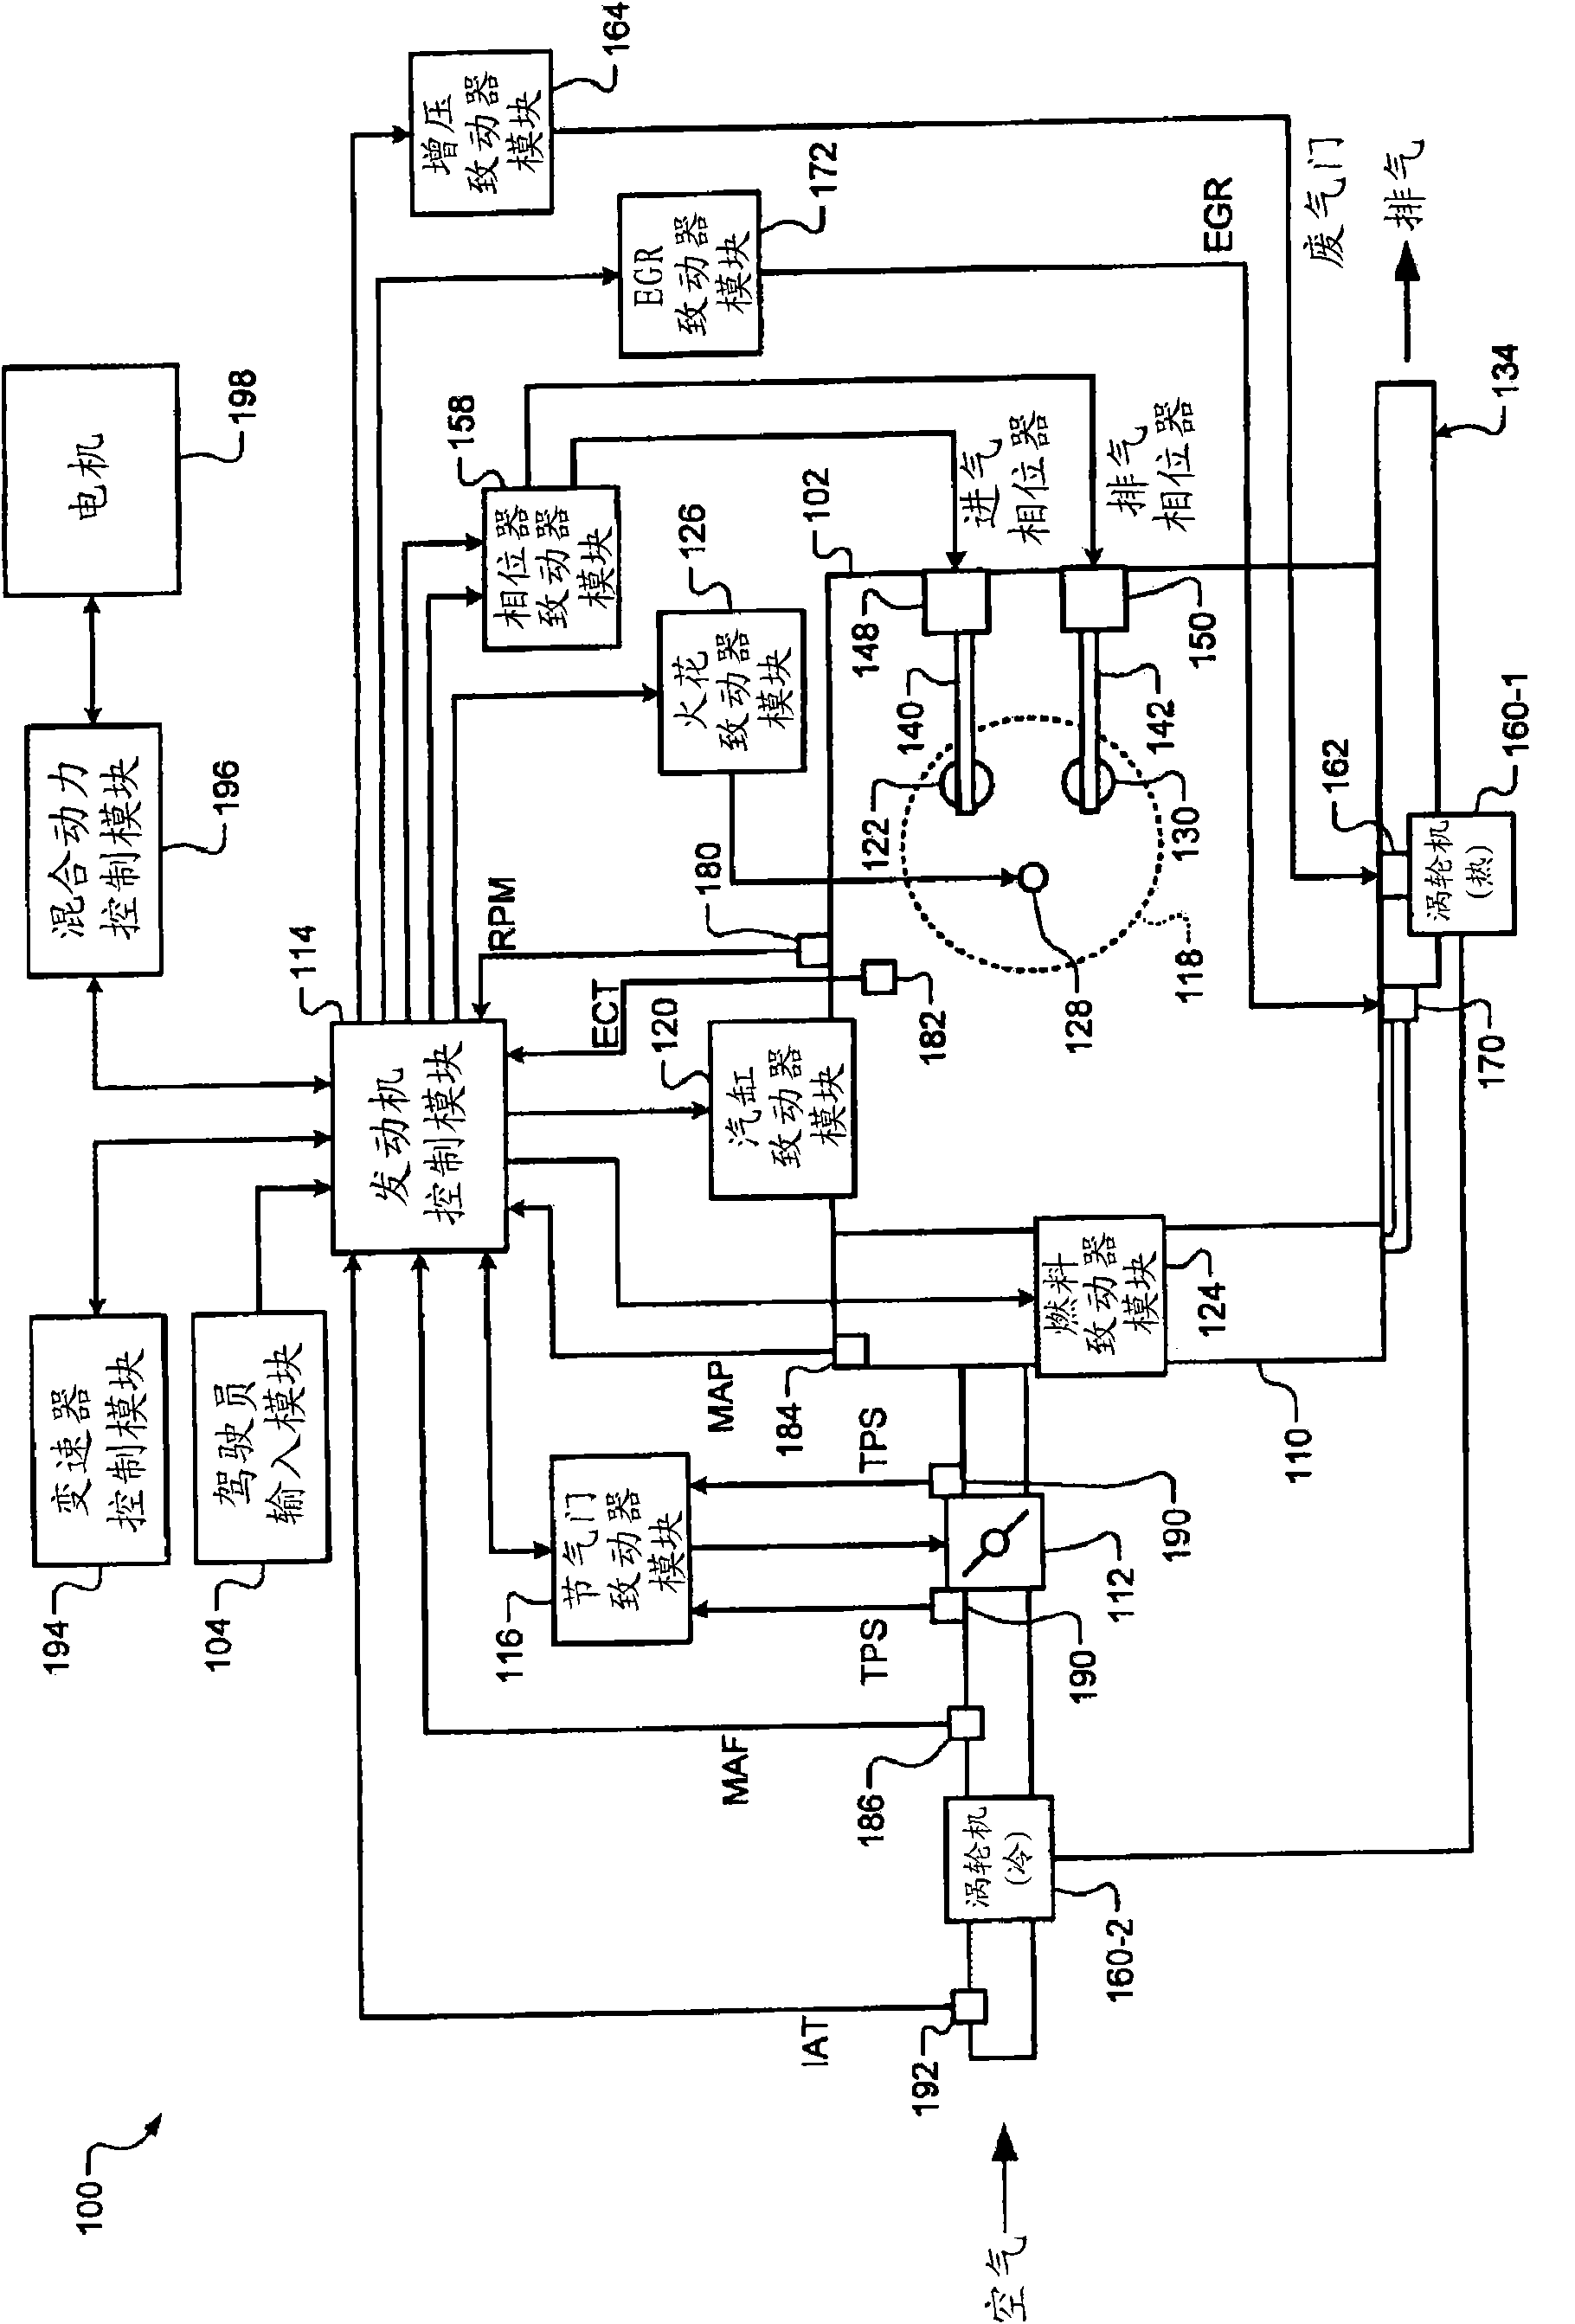 Securing throttle area in a coordinated torque control system